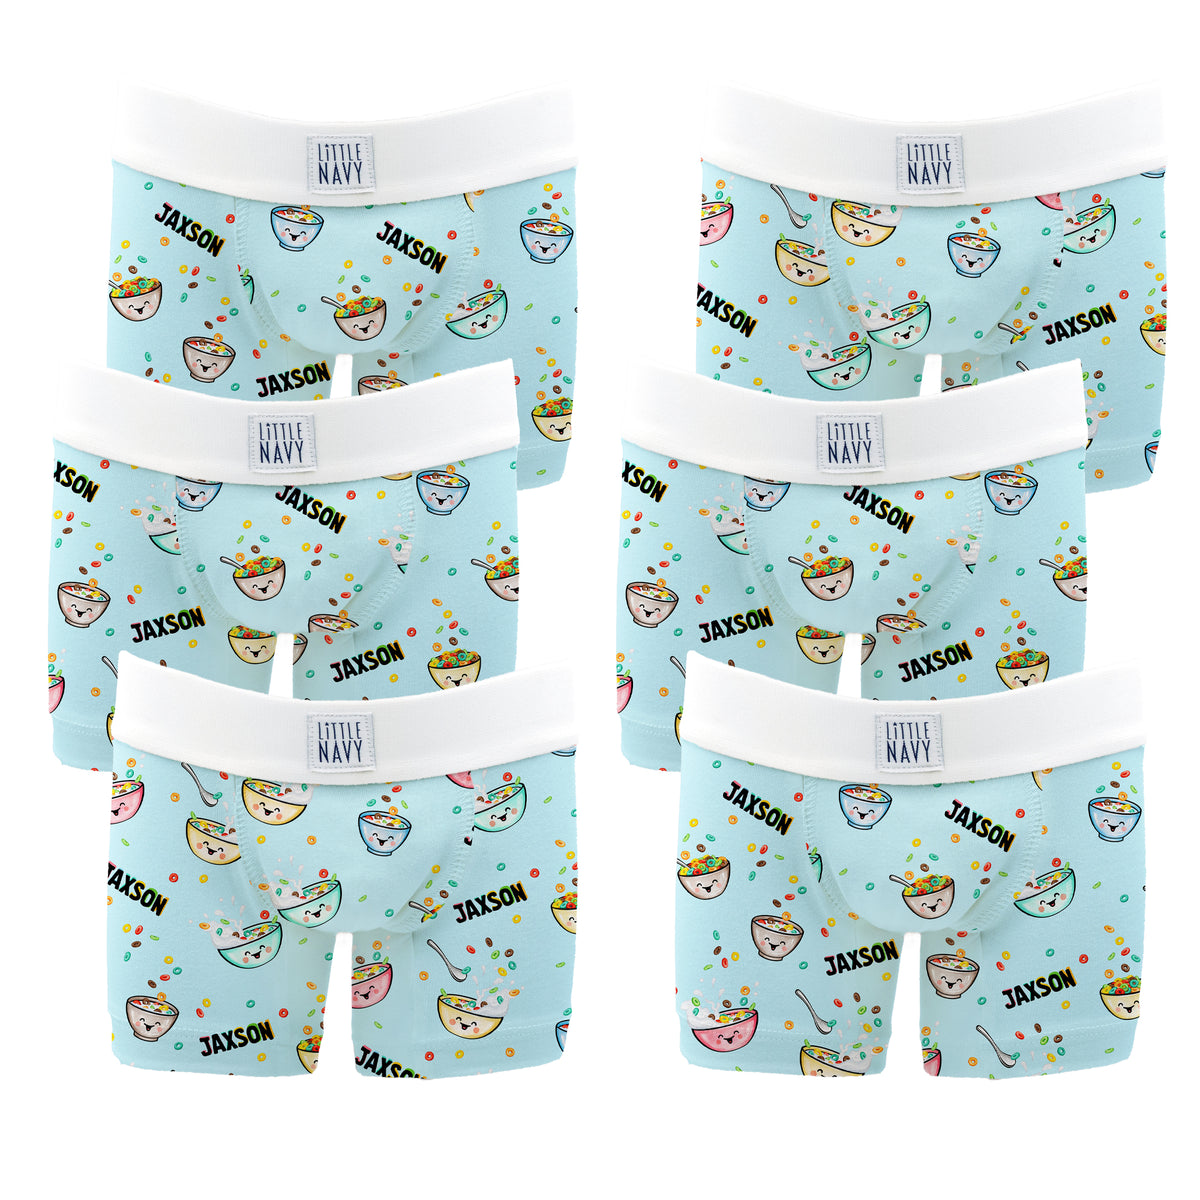 PAW Patrol boxers 3 pack COLOUR navy - RESERVED - 8347L-59X